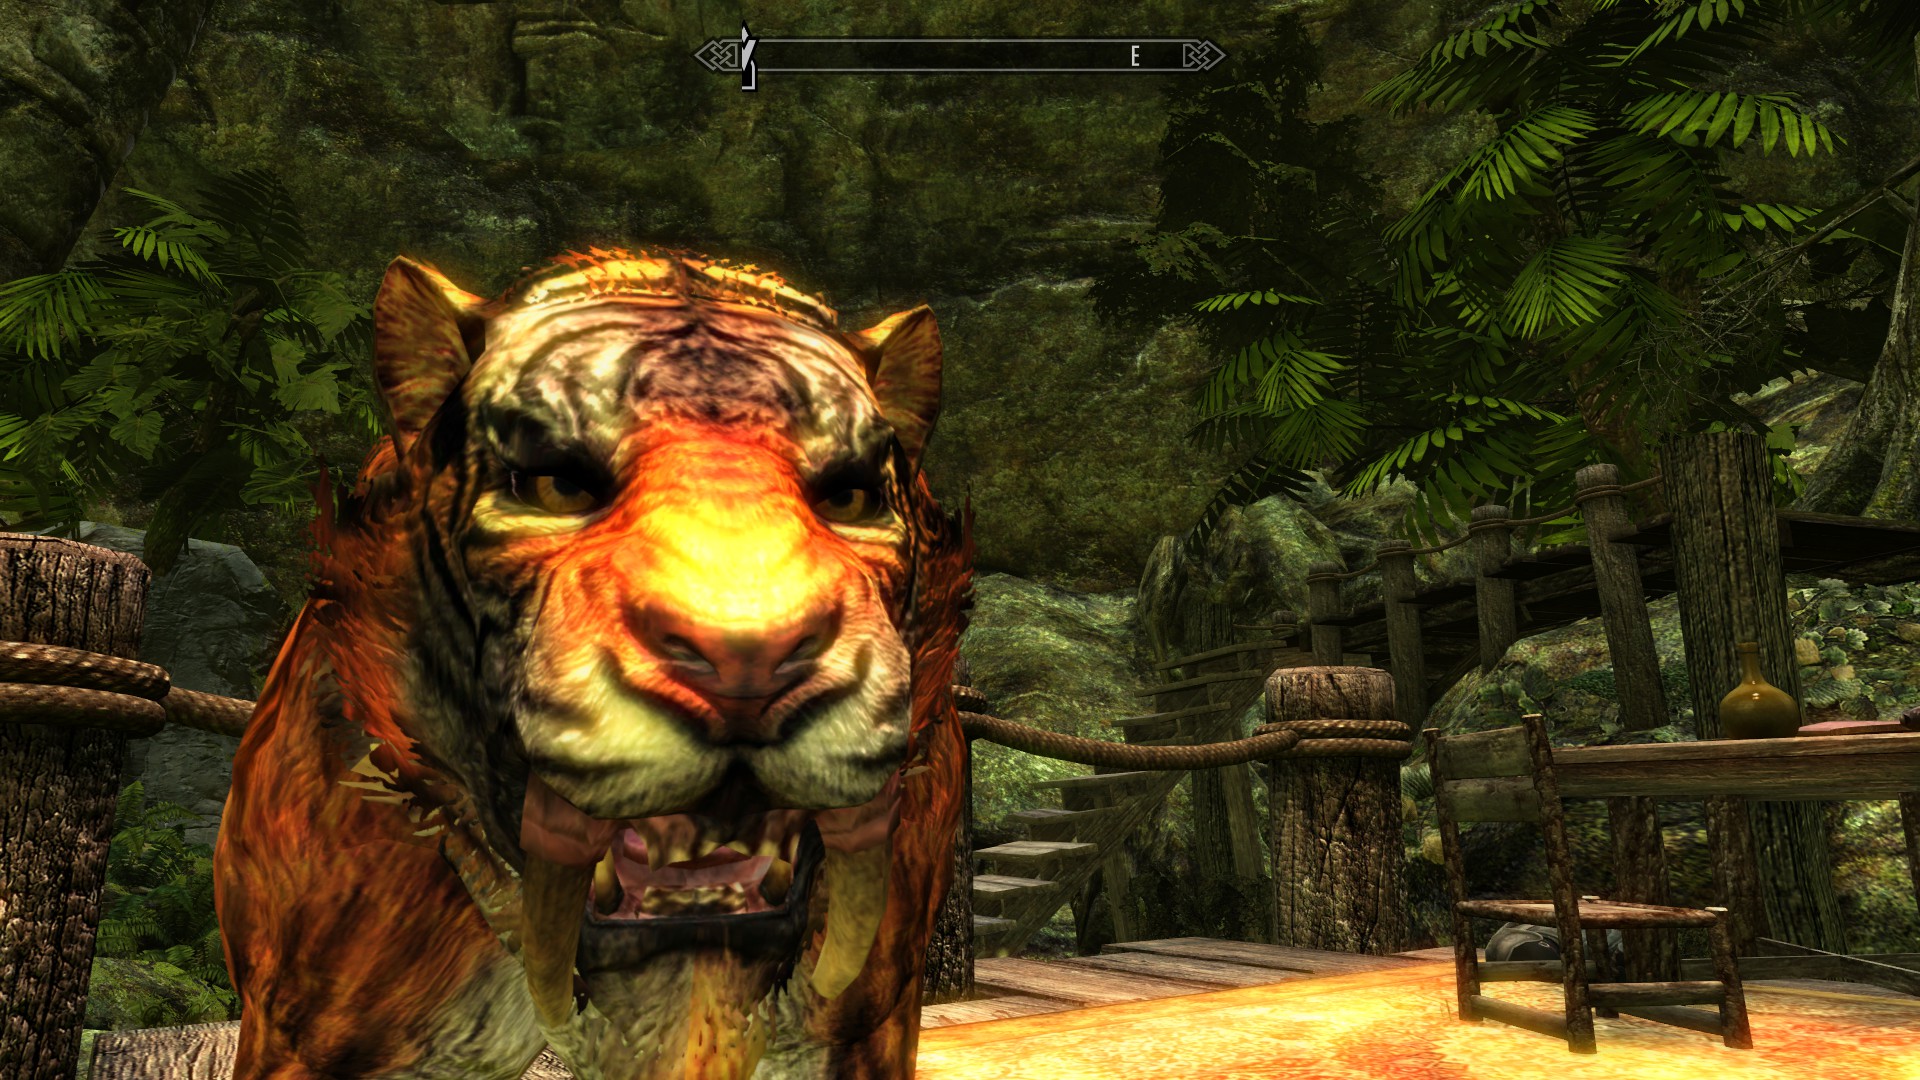 Download The Best Skyrim Mods for Xbox One, PS4, and PC